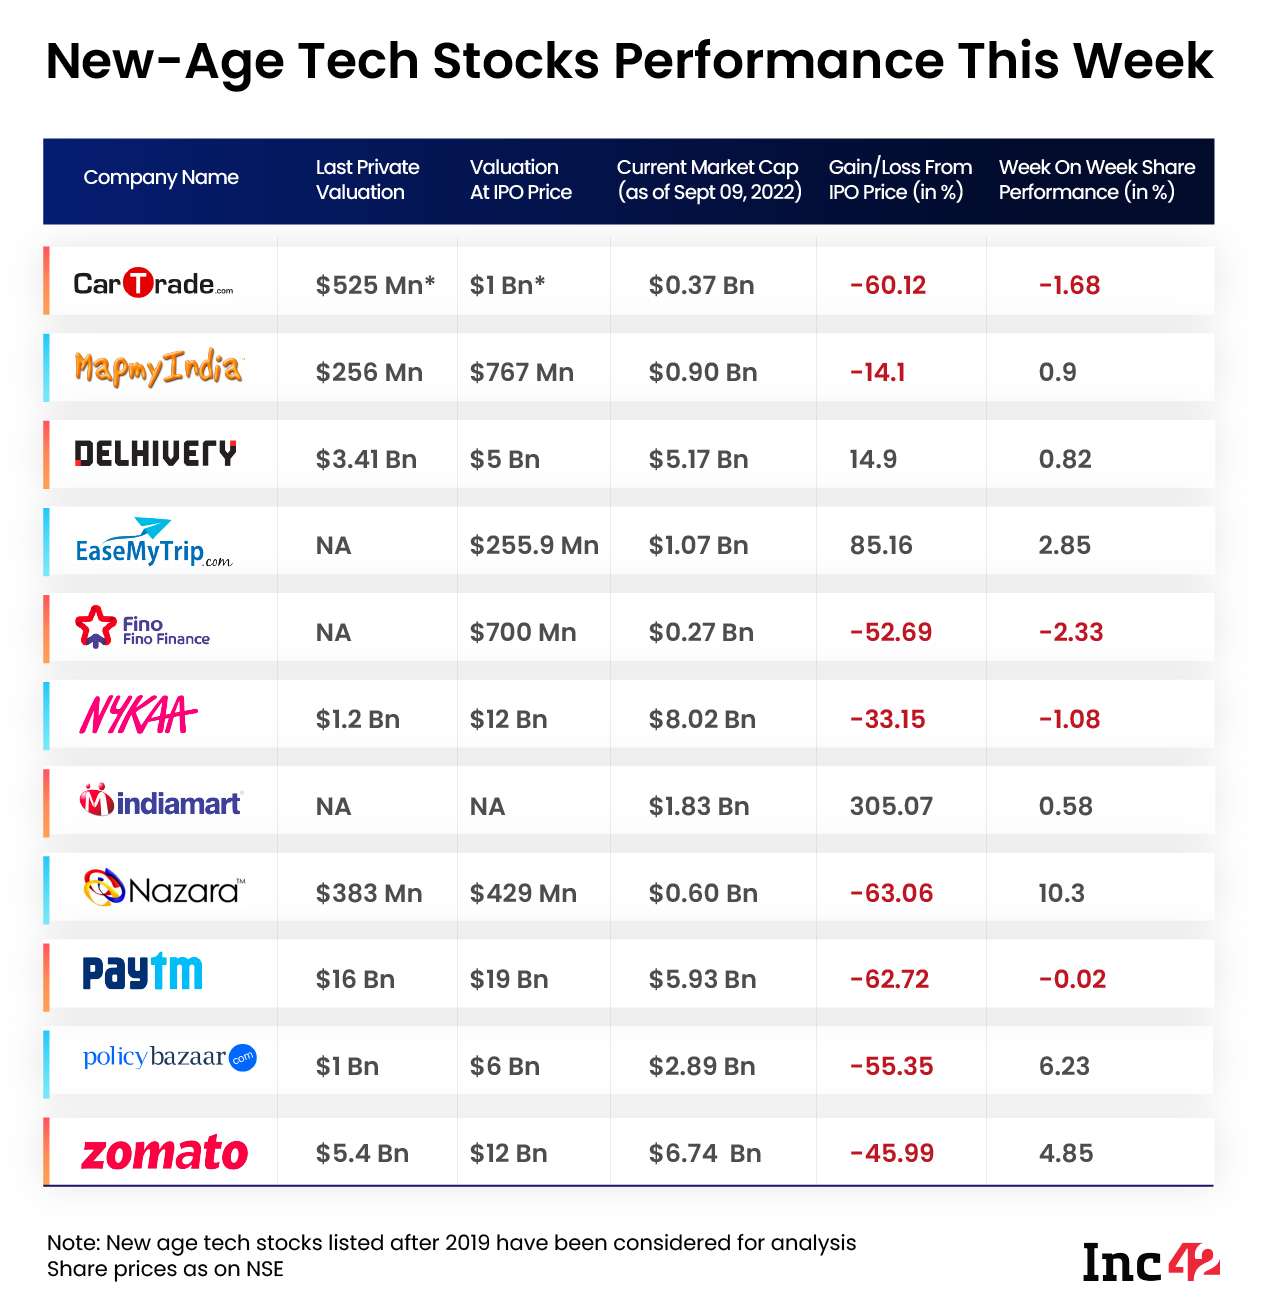 New-Age Tech Stocks Rise In Line With Broader Trend, Nazara Biggest Gainer This Week